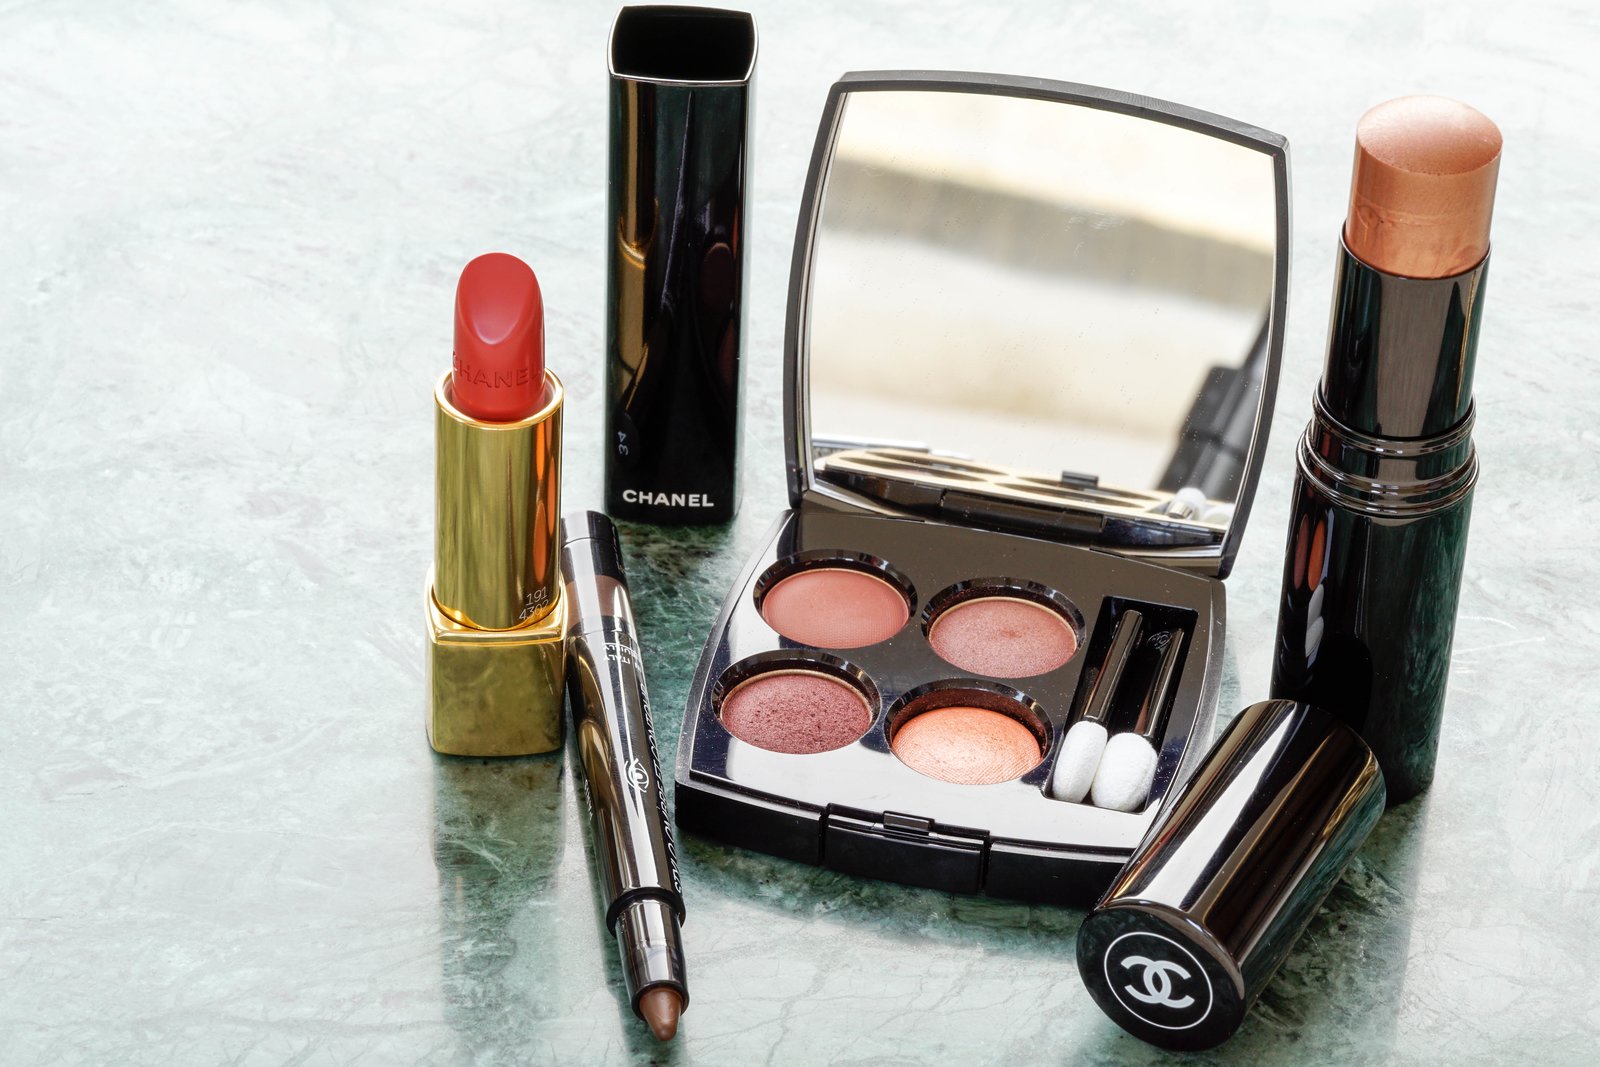 Close up of Chanel beauty products